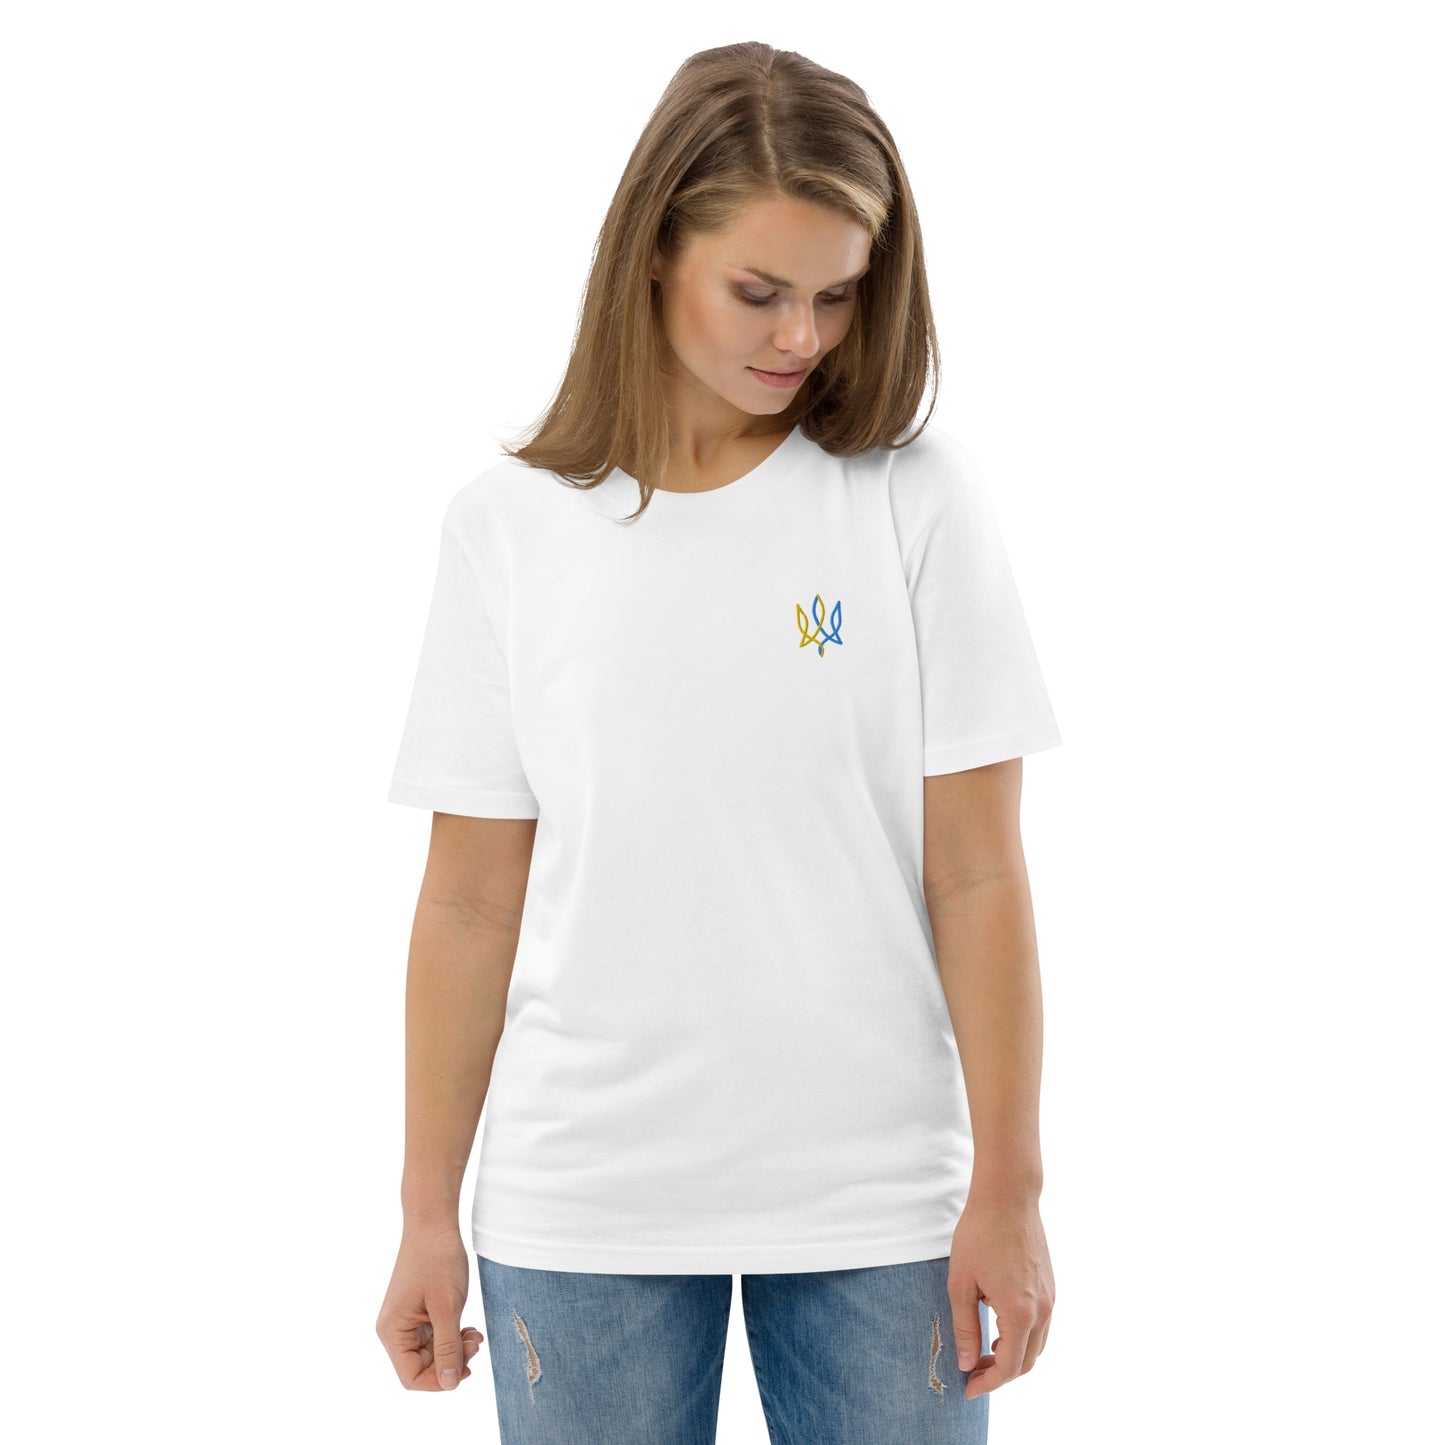 Two color trident unisex organic cotton t-shirt with embroidery in white